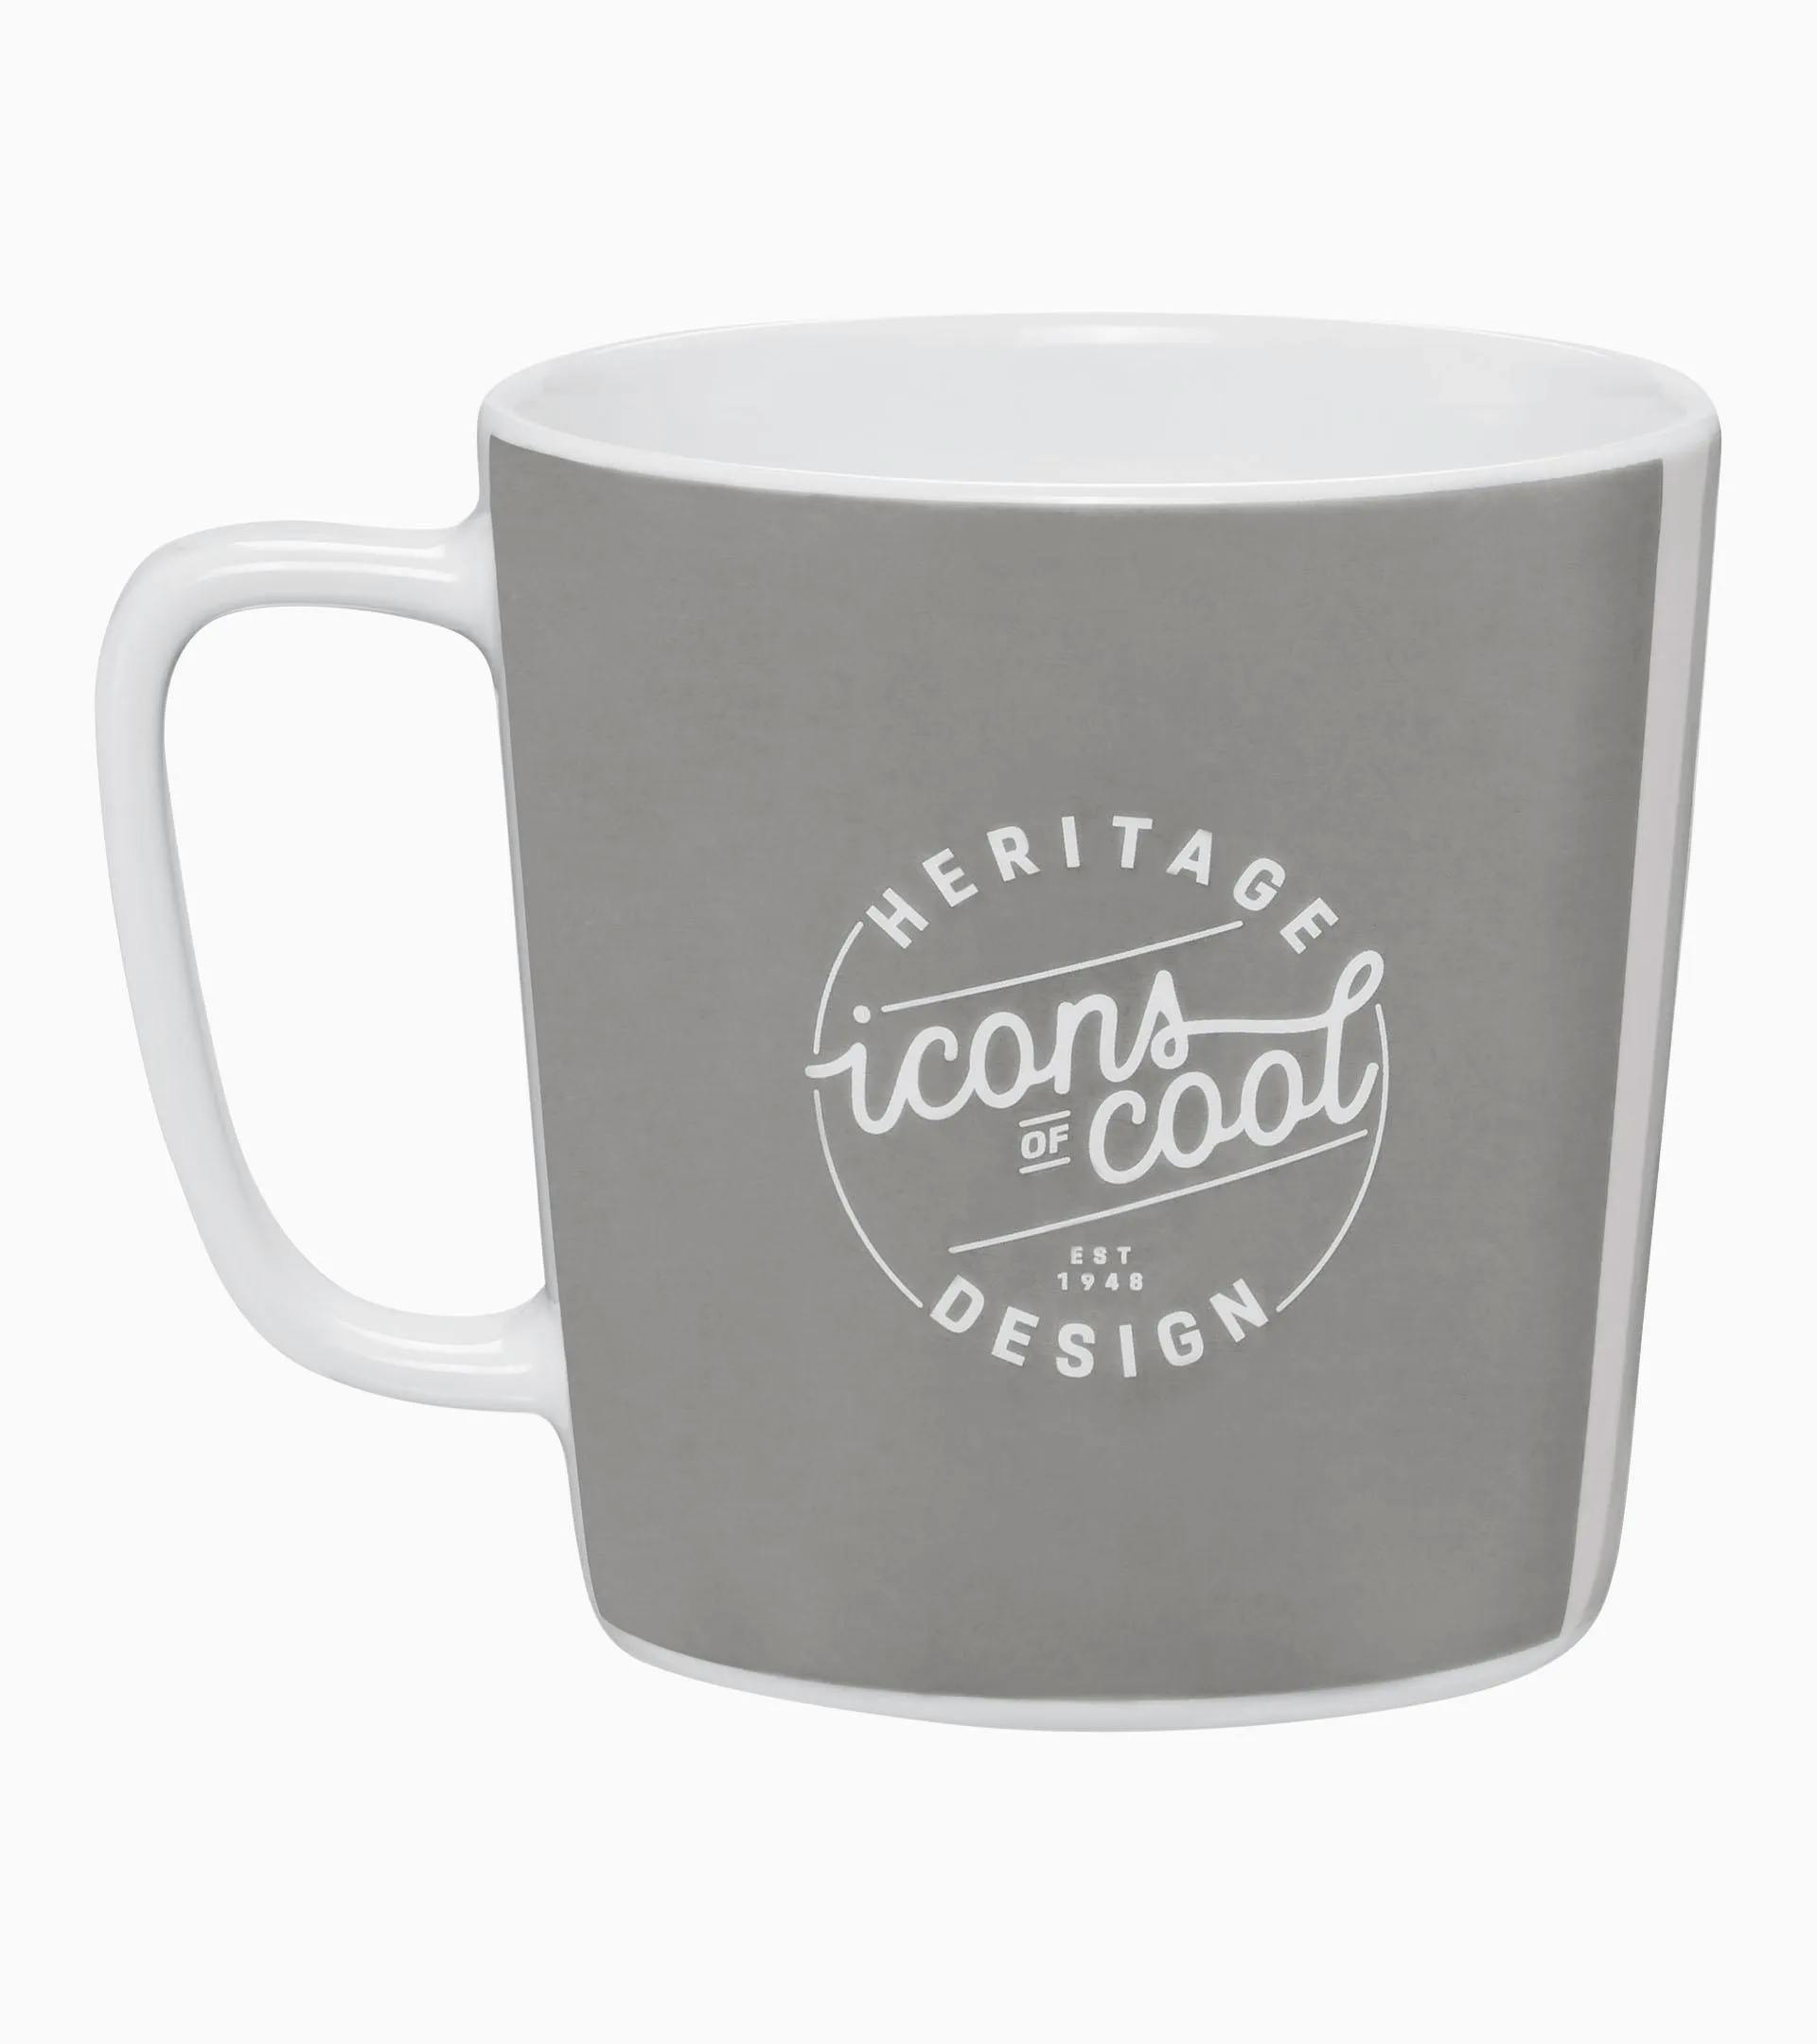 Tazza Collector's Cup n. 2 – Heritage Collection – Ltd. 2